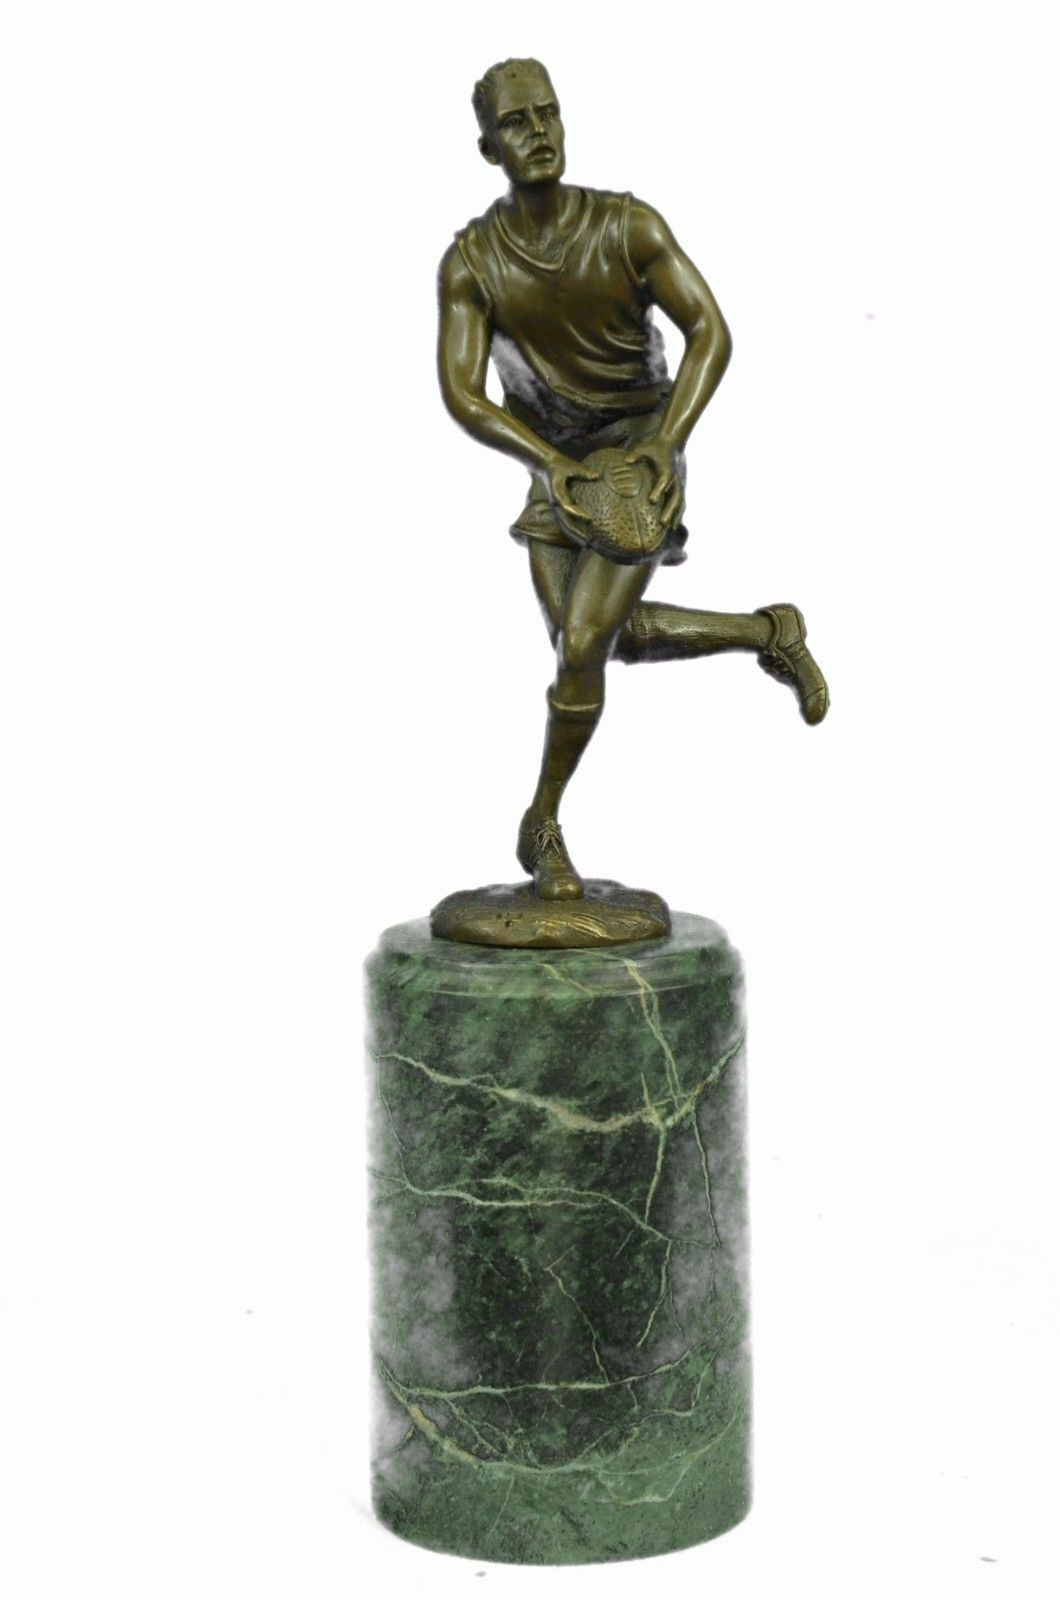 Handcrafted European Bronze Union League Rugby Football Player Sculpture Decor